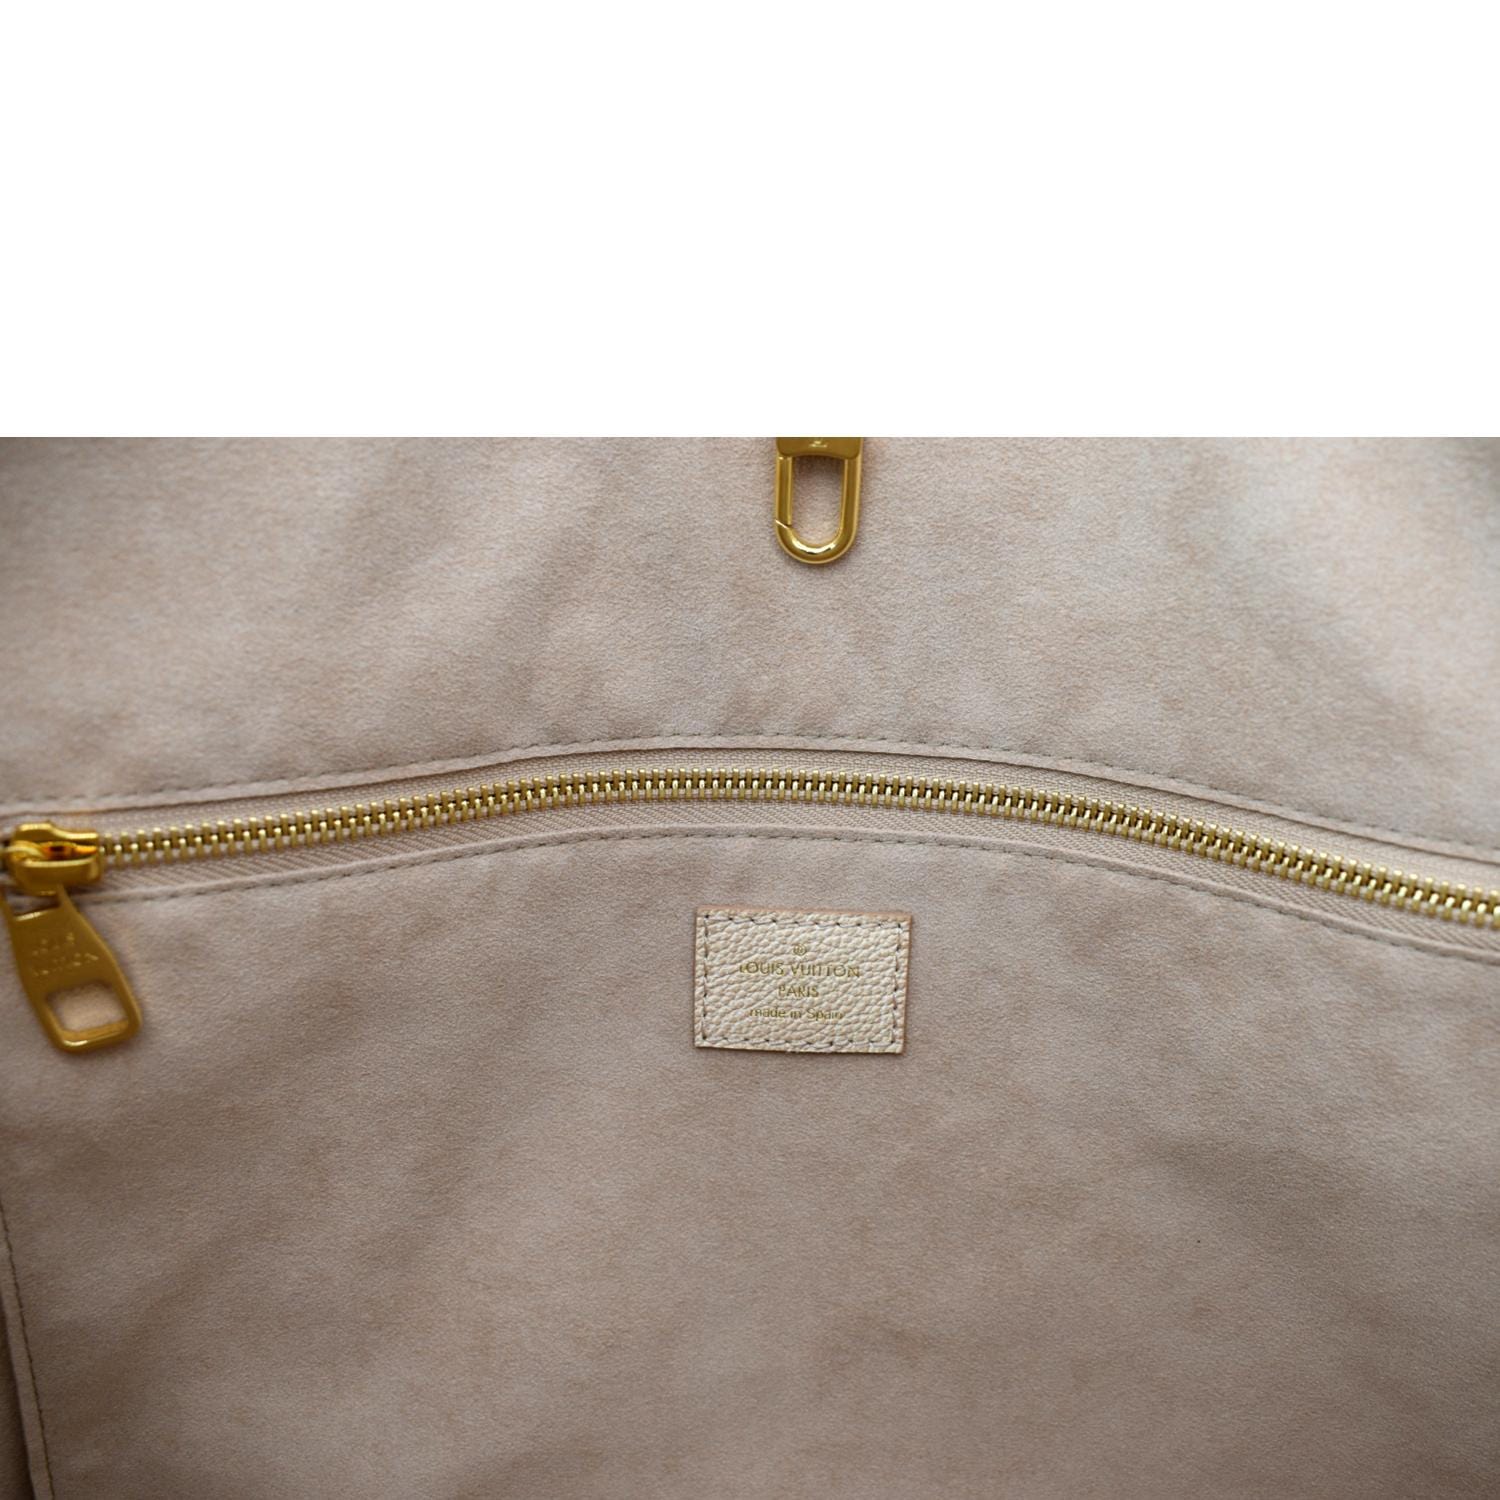 LOUIS VUITTON Stardust Neverfull MM Monogram Leather Tote Bag Pale